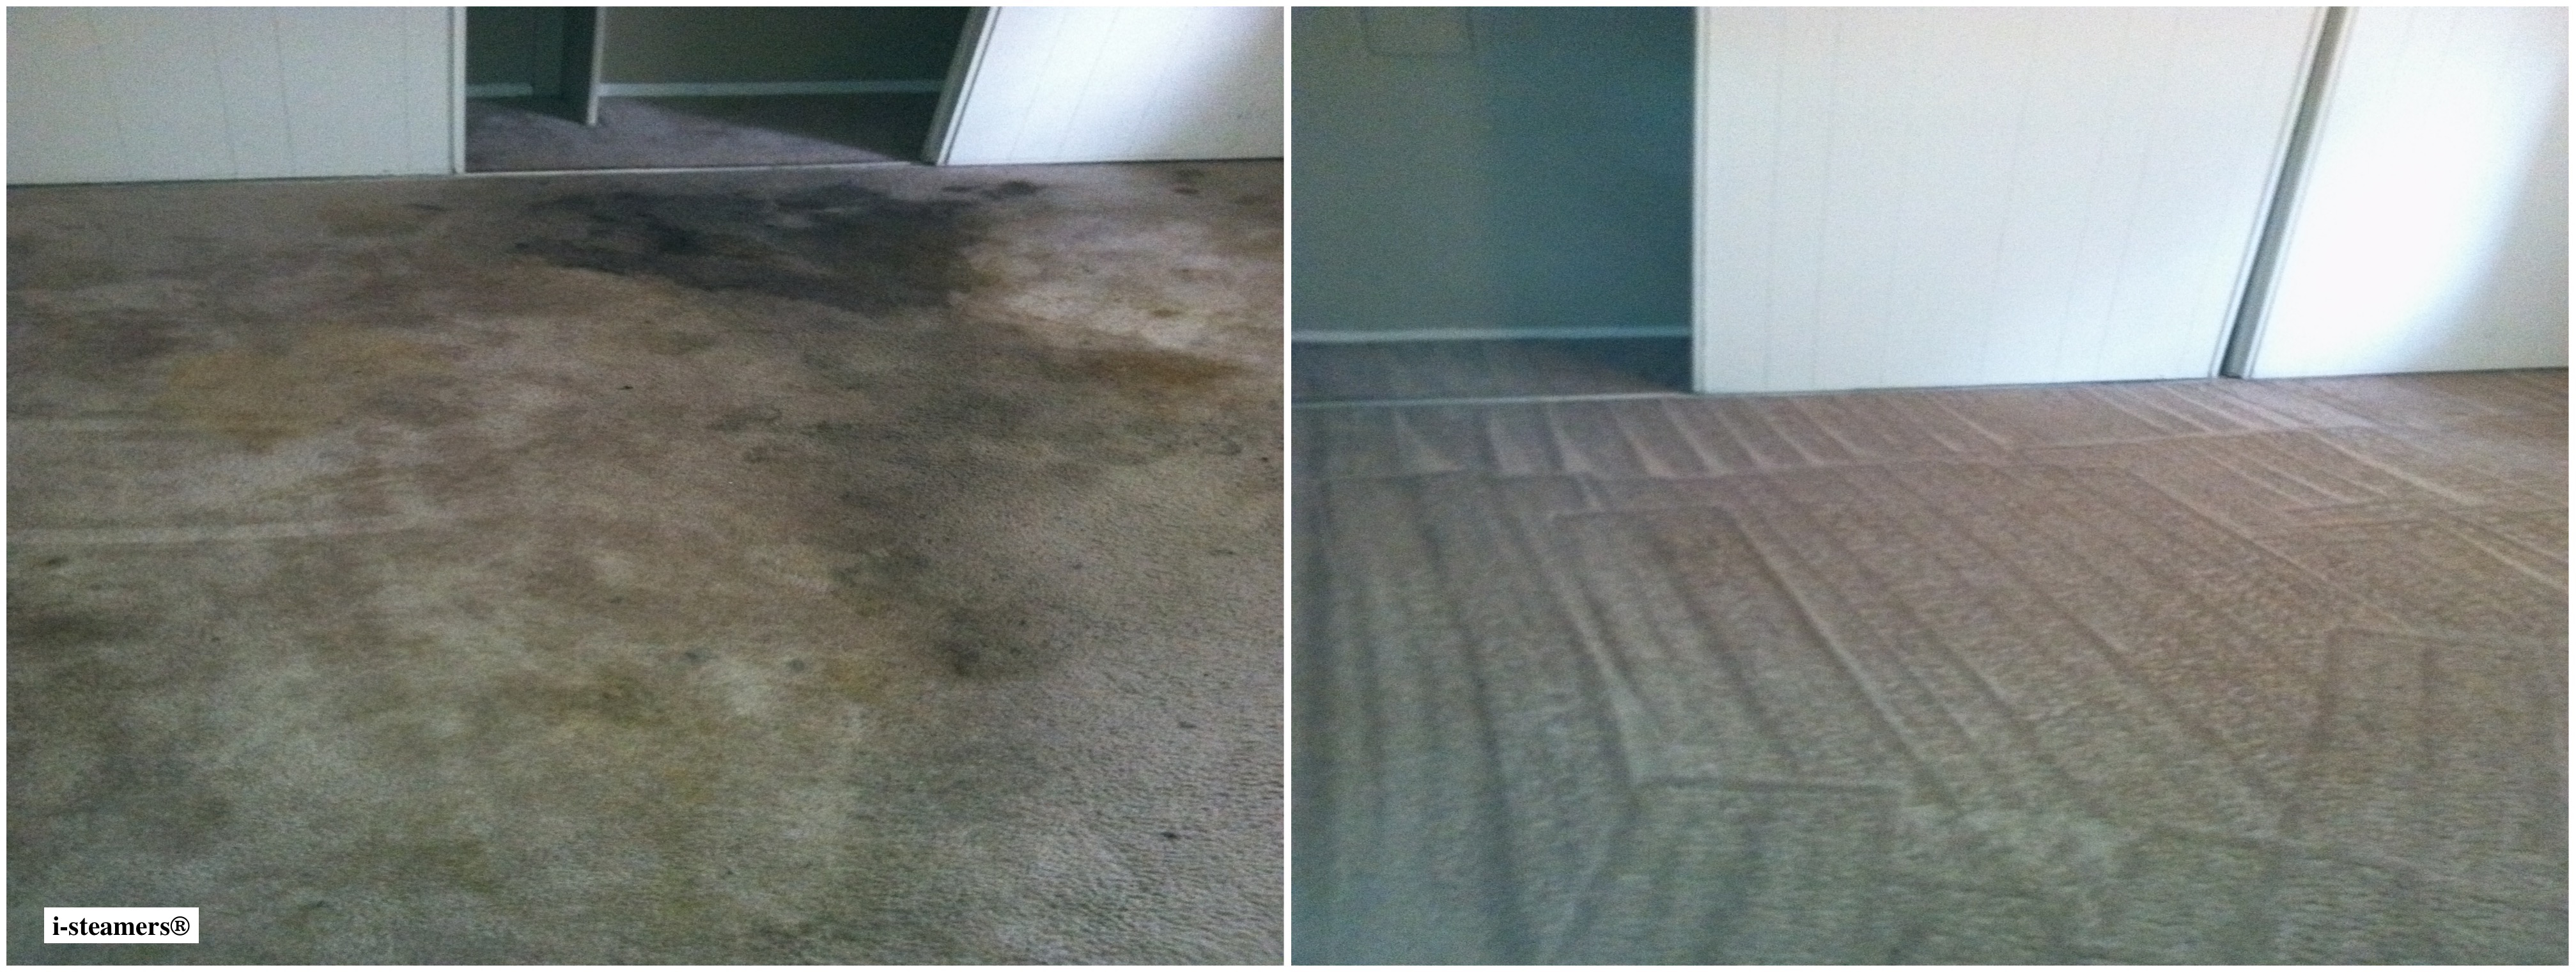 carpet cleaner service nyc